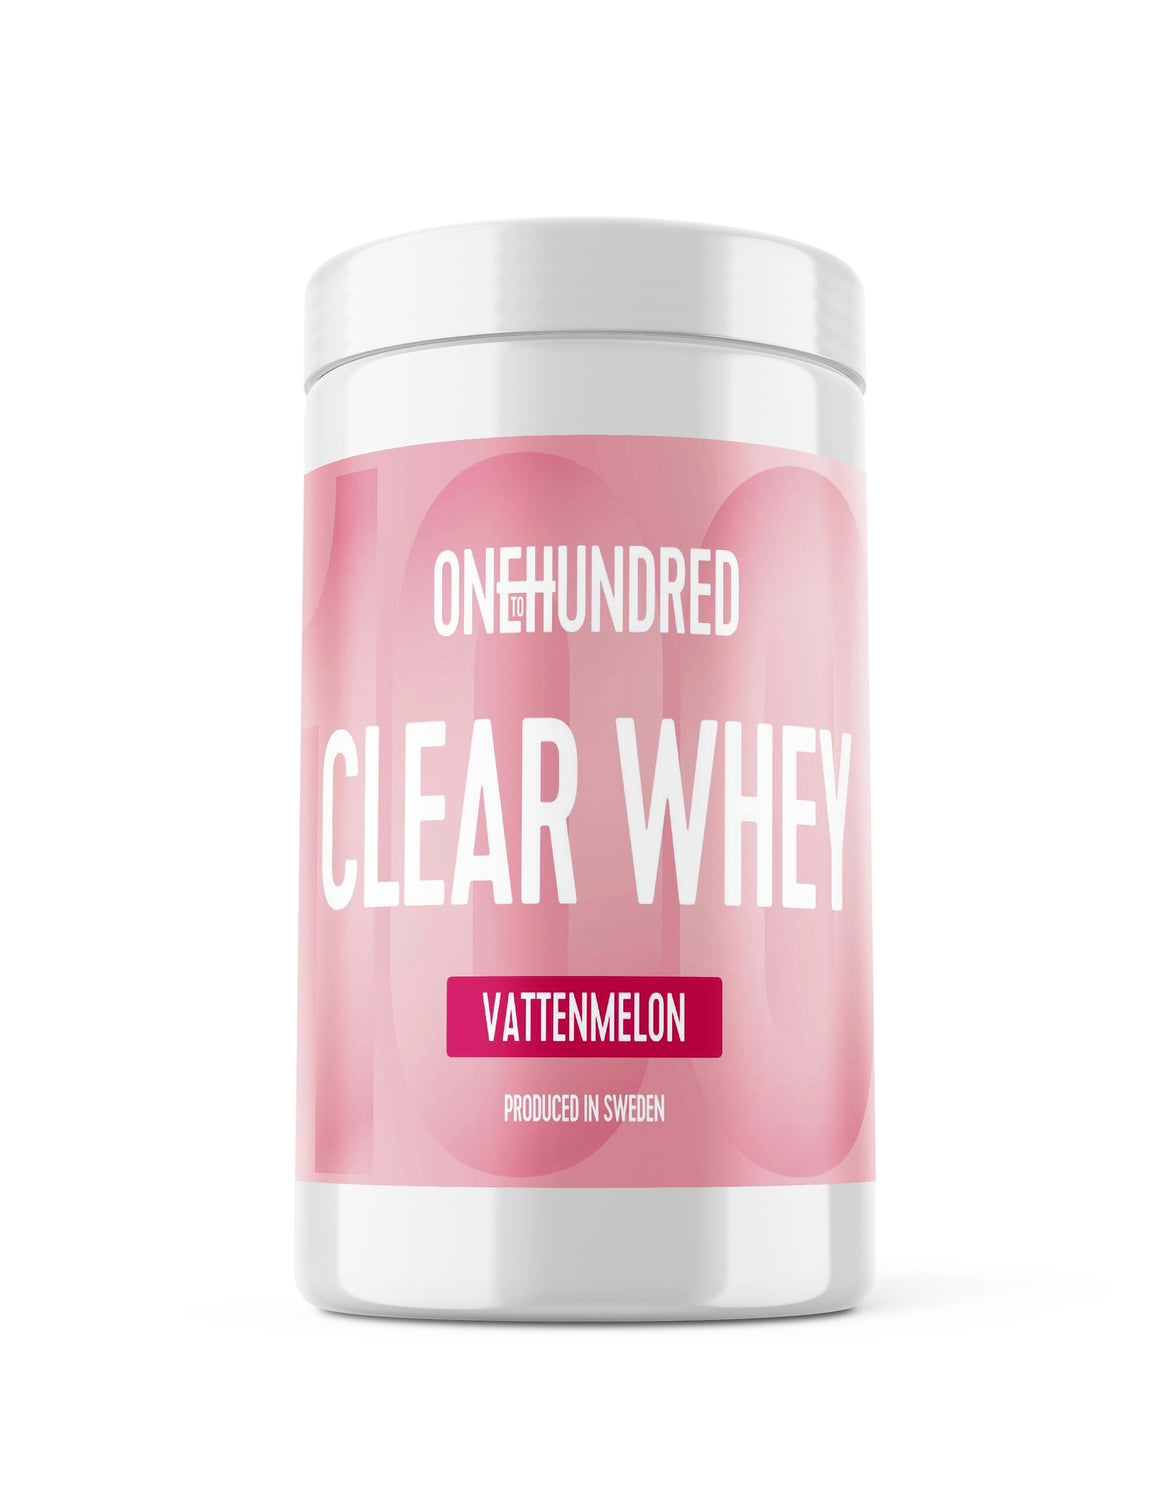 Clear Whey Vattenmelon 400 g